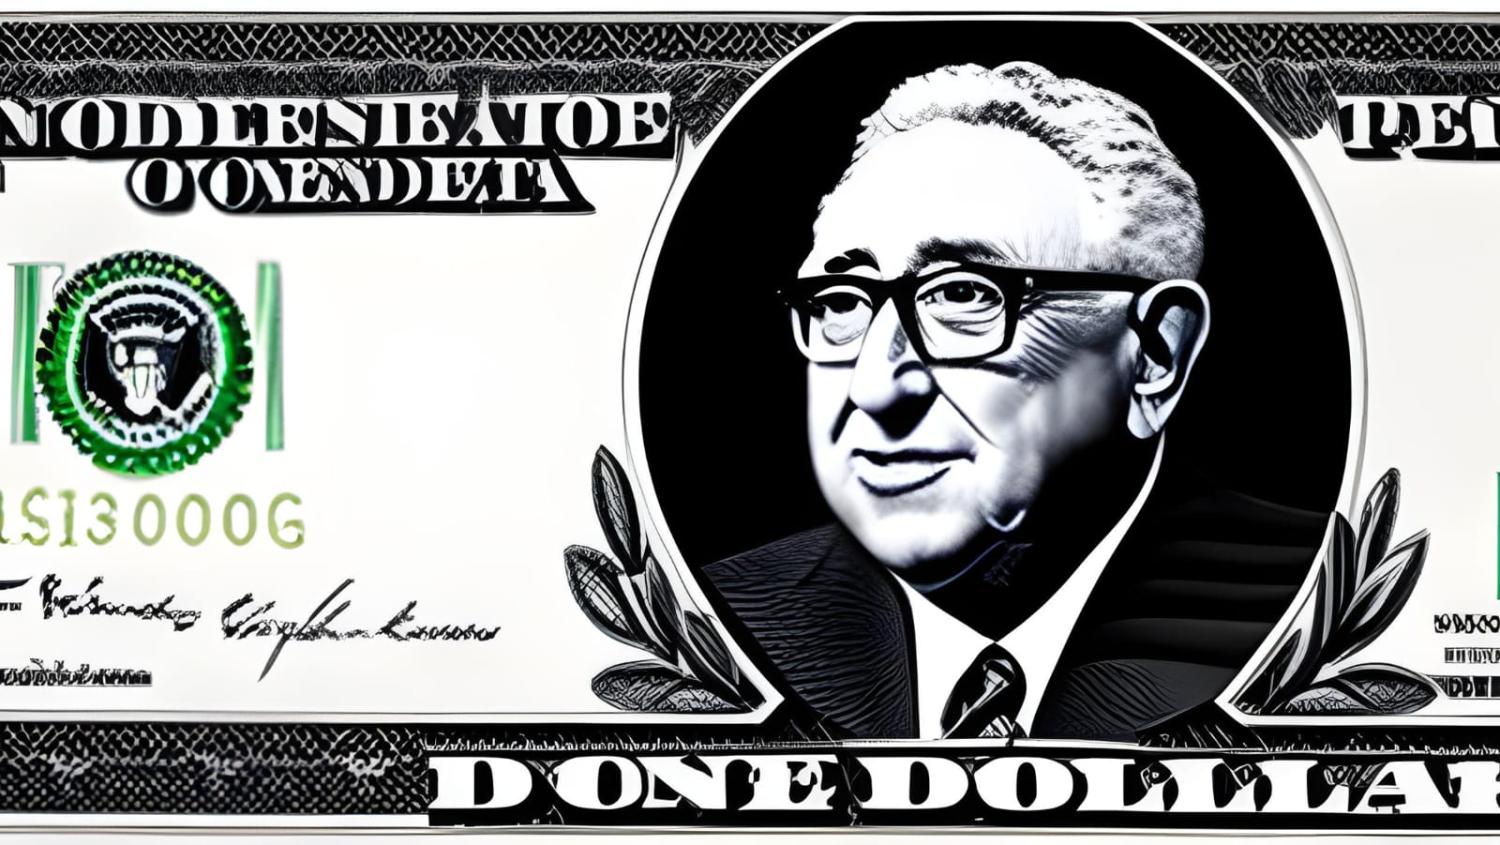 We asked an AI image generator to create an illustration using the prompts "Henry Kissinger" "hip hop" and "Billions" - this spat out. (For the record, Lydia doesn't think it has any resemblance to hip hop art.)